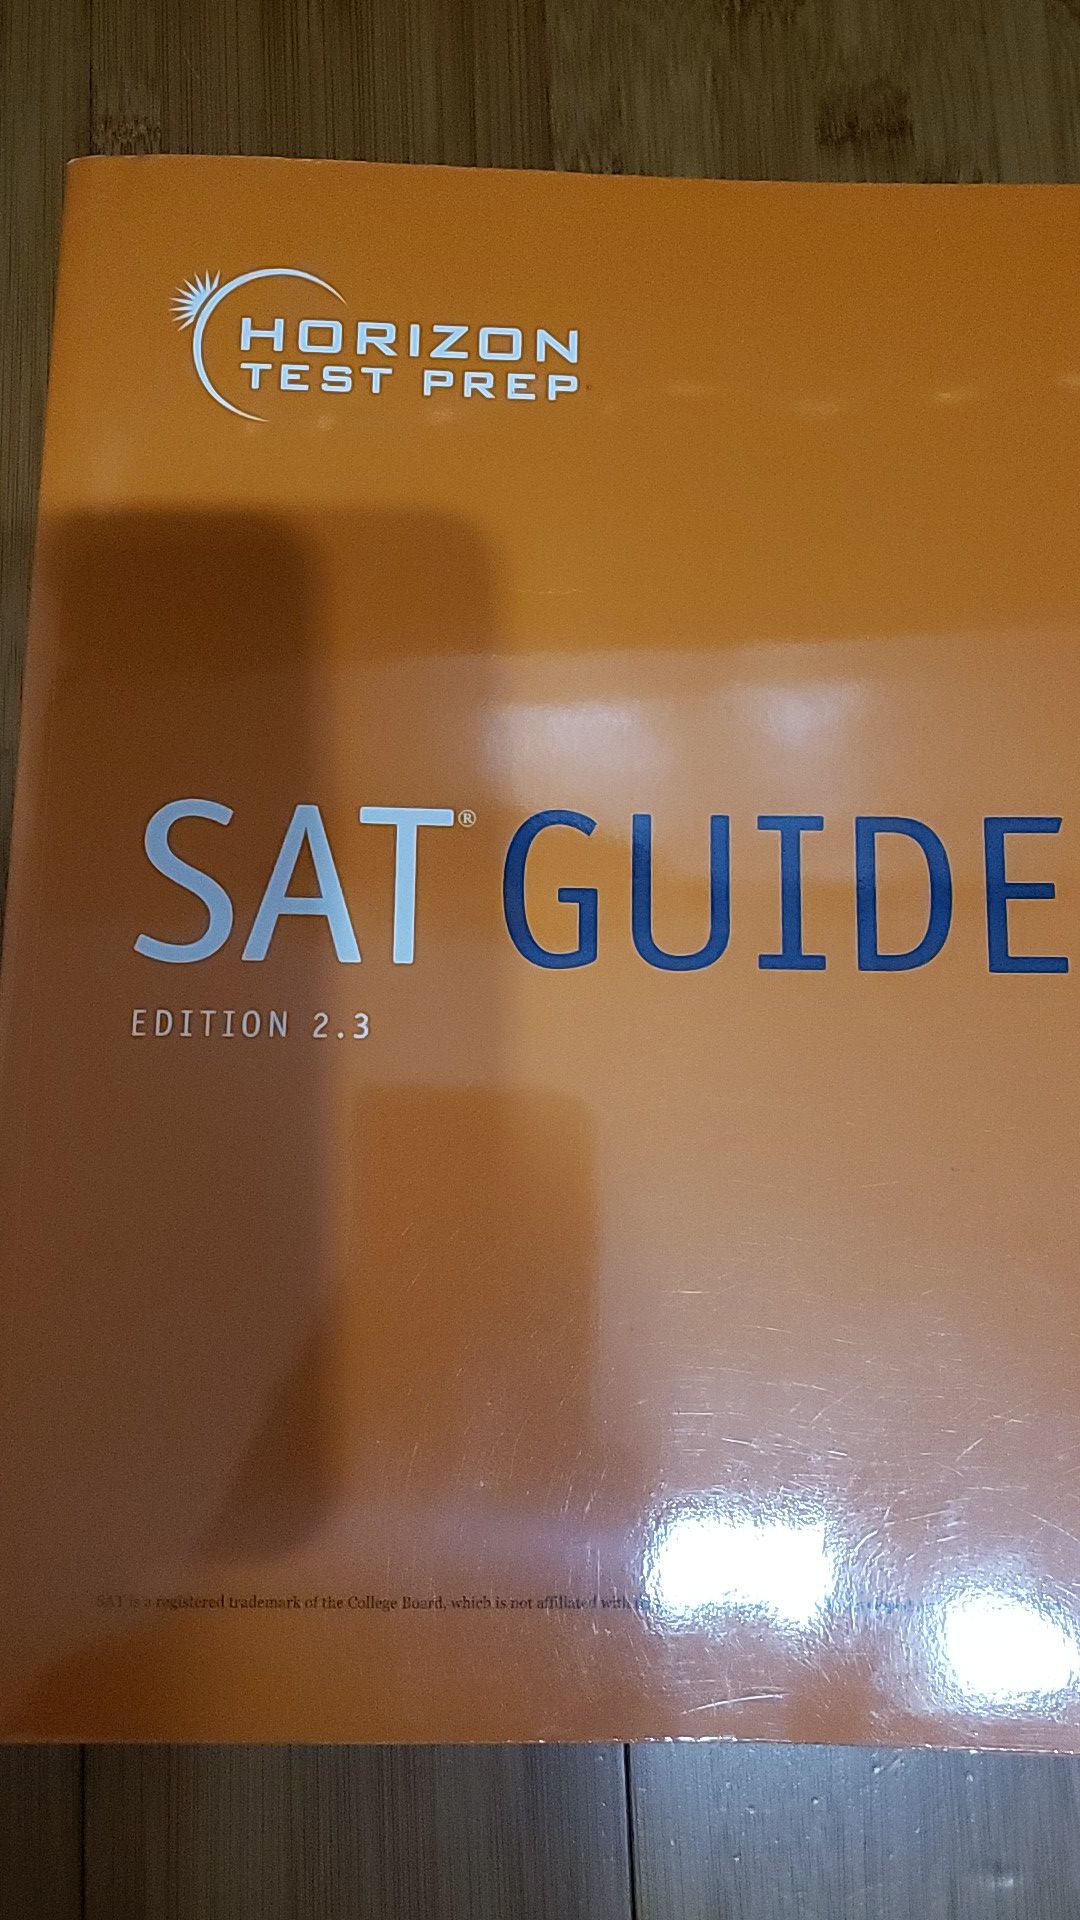 SAT Guide Edition 2.3 by Horizon Test Prep